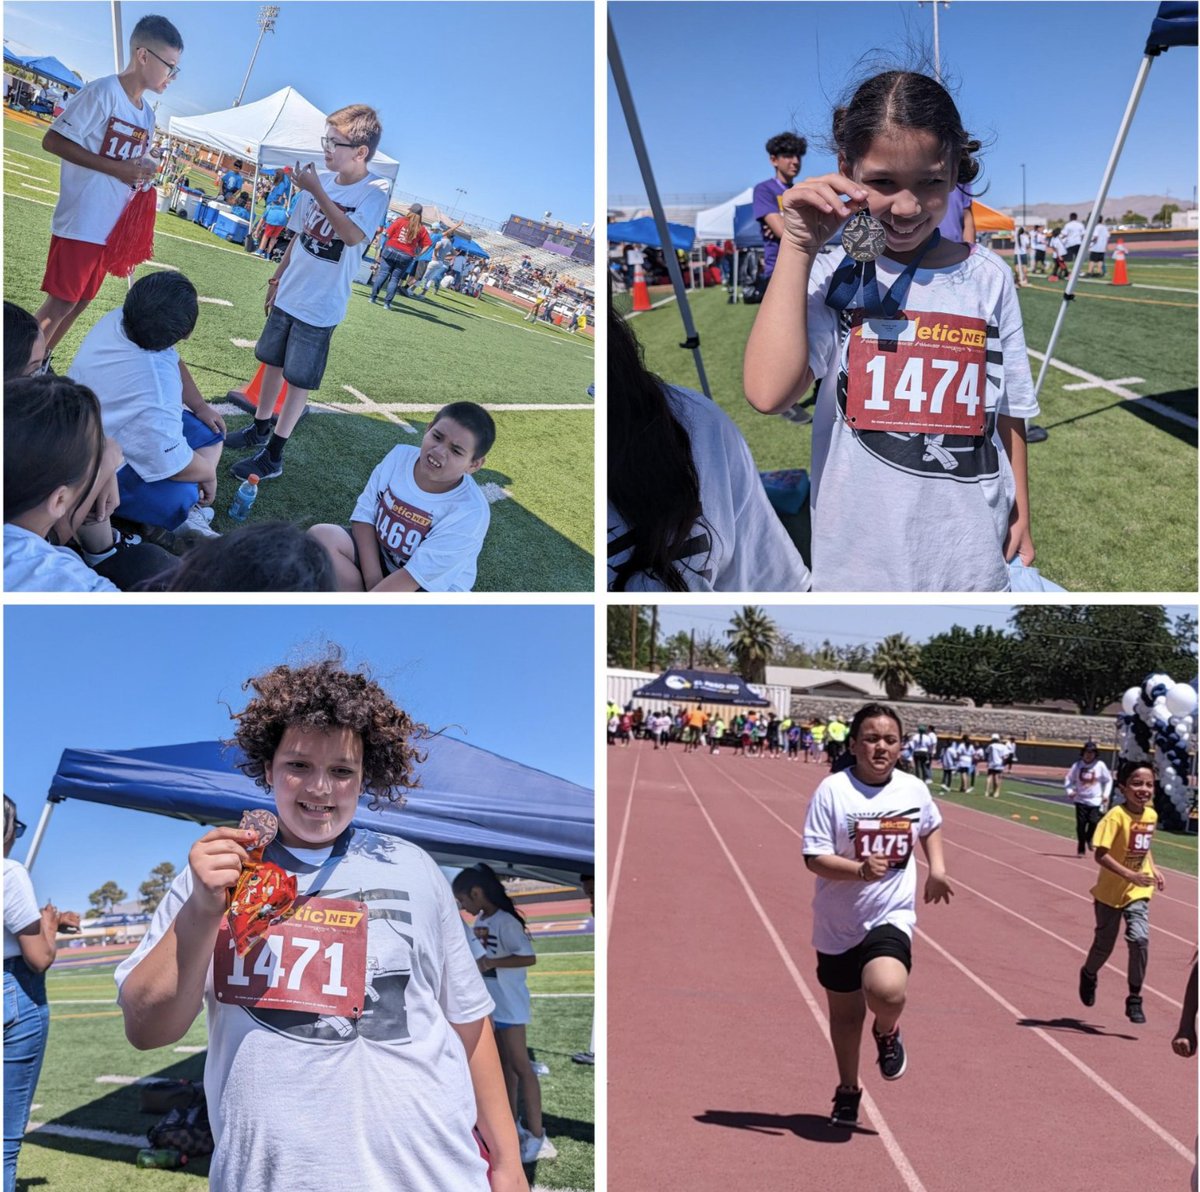 Congratulations to our Lions that participated and brought home medals from the Unidos Games. We are so proud of you. #itstartswithus @ELPASO_ISD